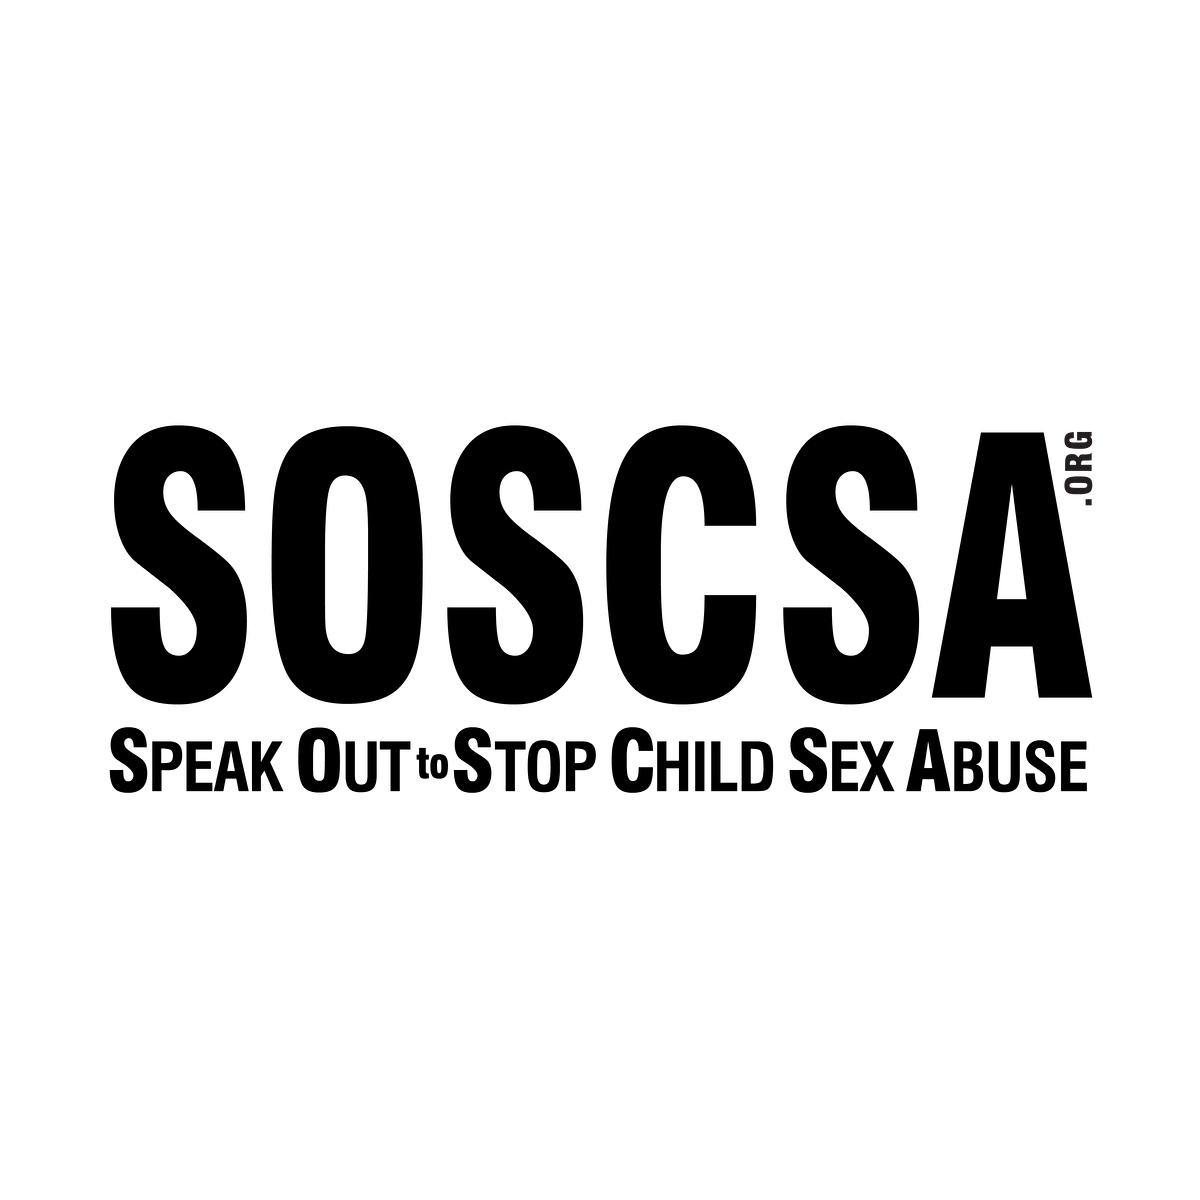 Boy Scouts Issues - SOSCSA.org